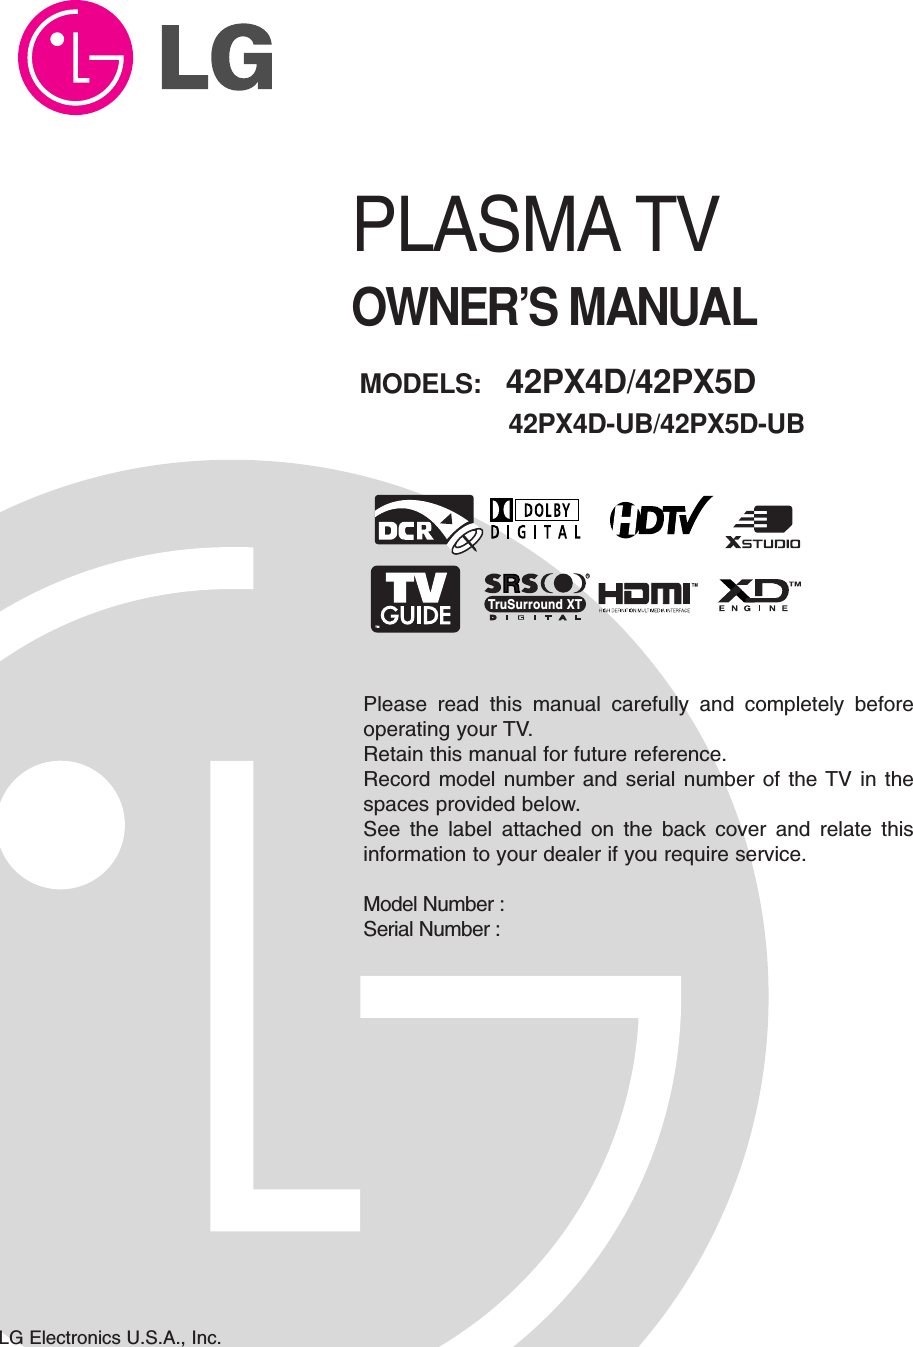 Please read this manual carefully and completely beforeoperating your TV. Retain this manual for future reference.Record model number and serial number of the TV in thespaces provided below. See the label attached on the back cover and relate thisinformation to your dealer if you require service.Model Number : Serial Number : MODELS: 42PX4D/42PX5D42PX4D-UB/42PX5D-UBLG Electronics U.S.A., Inc.TMRTruSurround XTPLASMA TVOWNER’S MANUAL